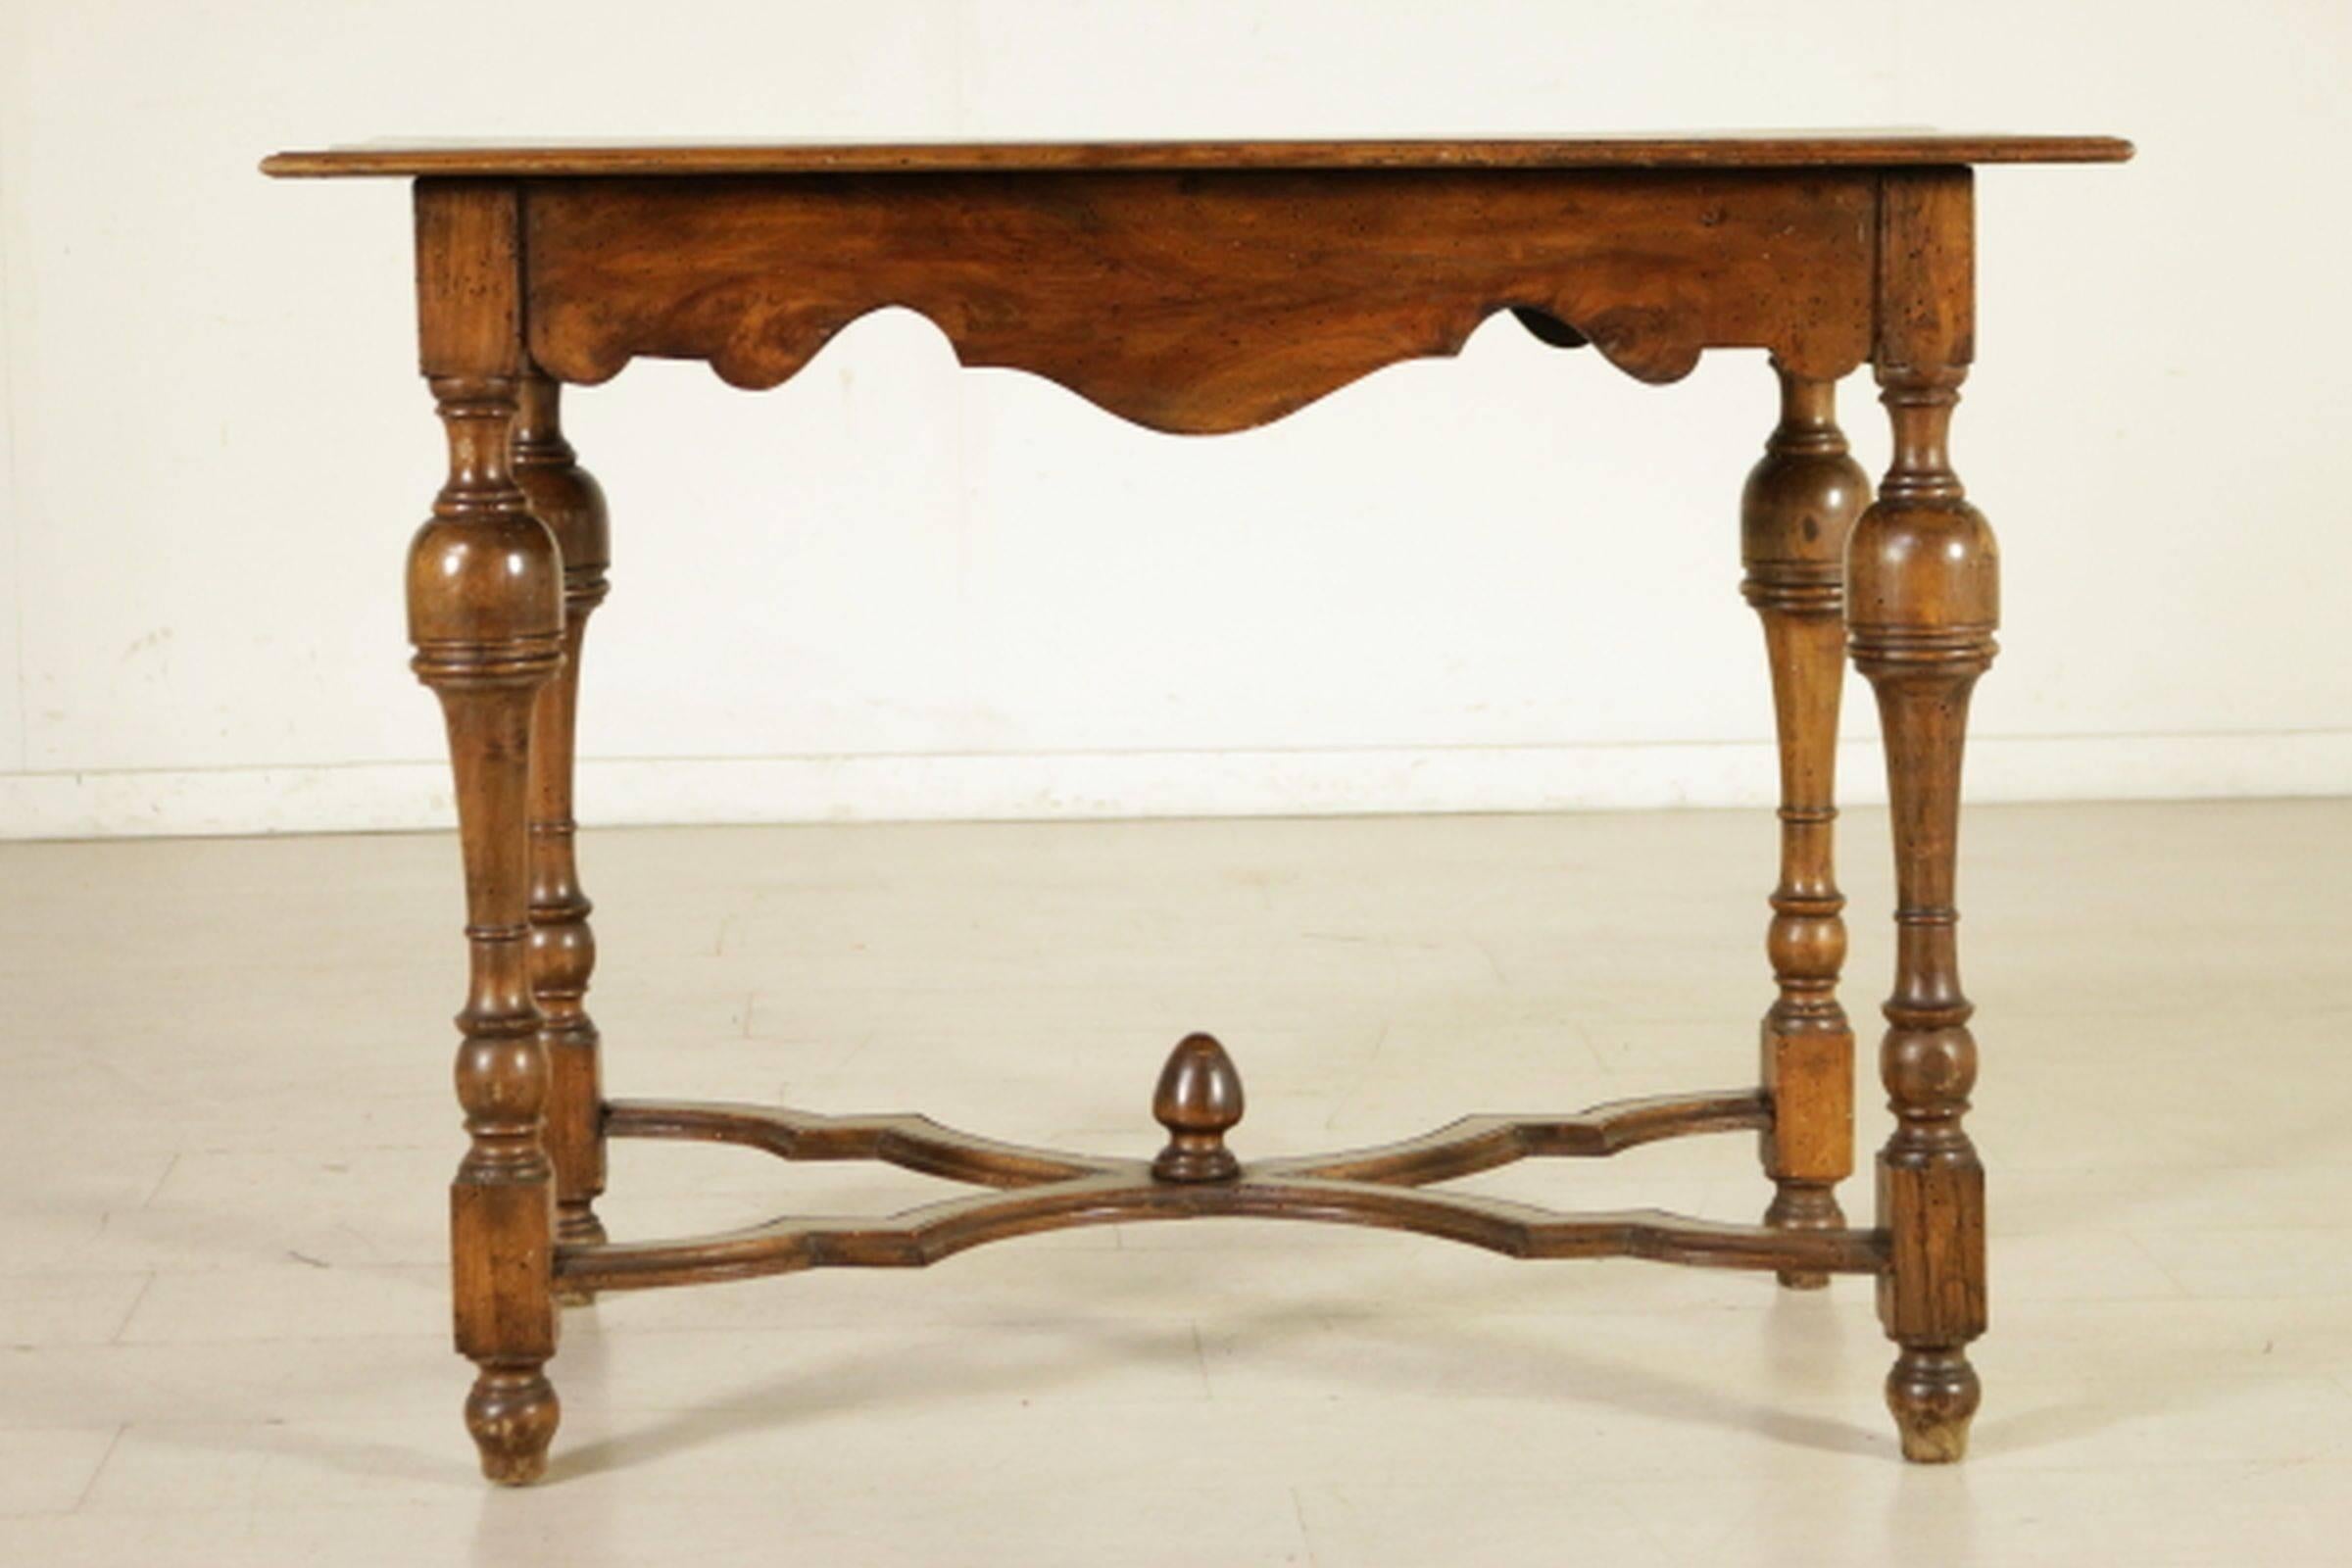 Rectangular top with molded edge above a shaped frieze with a single drawer raised on baluster turned legs ending on compressed bun feet joined by an incurving stretcher.